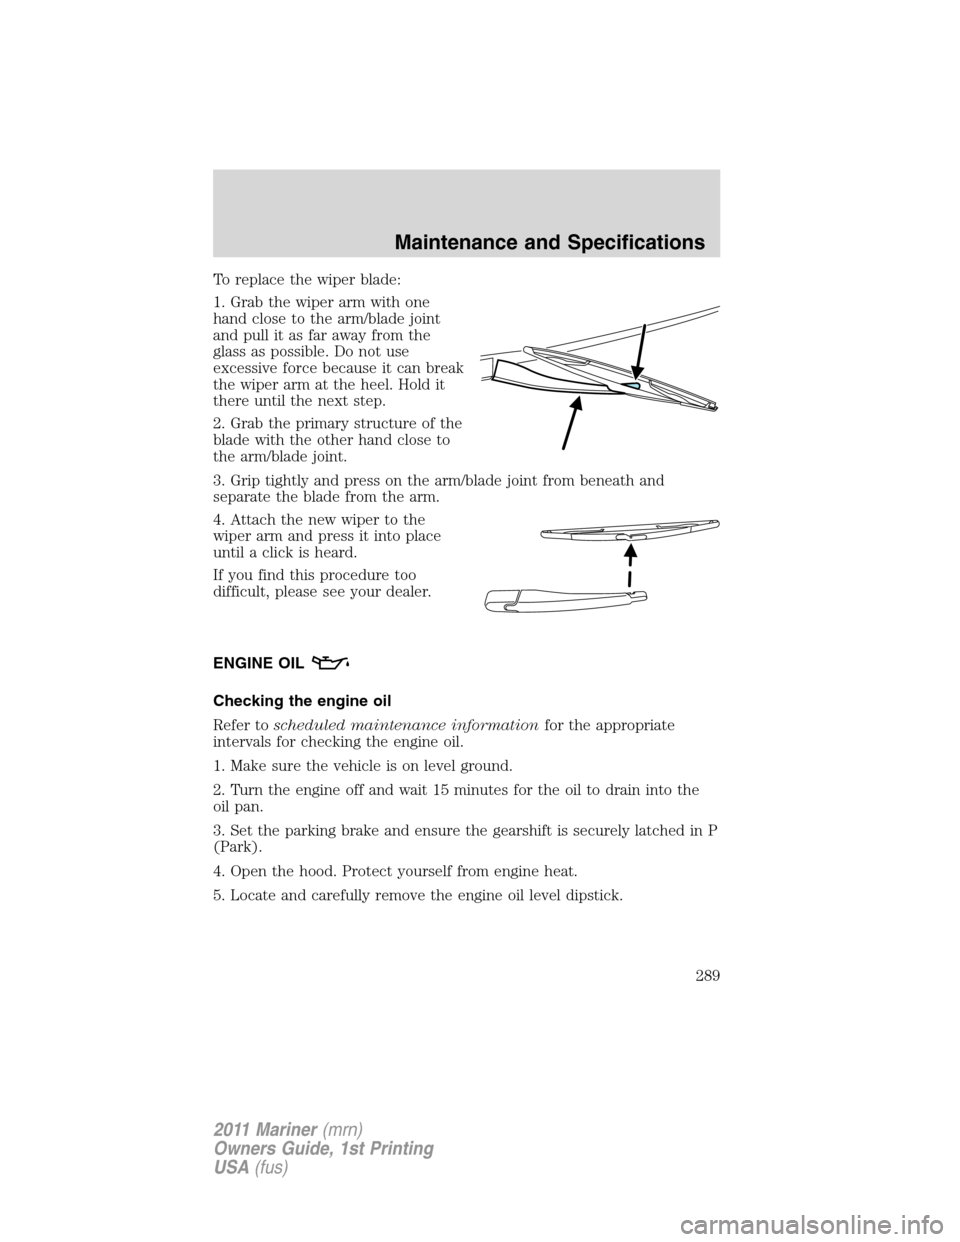 Mercury Mariner 2011  Owners Manuals To replace the wiper blade:
1. Grab the wiper arm with one
hand close to the arm/blade joint
and pull it as far away from the
glass as possible. Do not use
excessive force because it can break
the wip